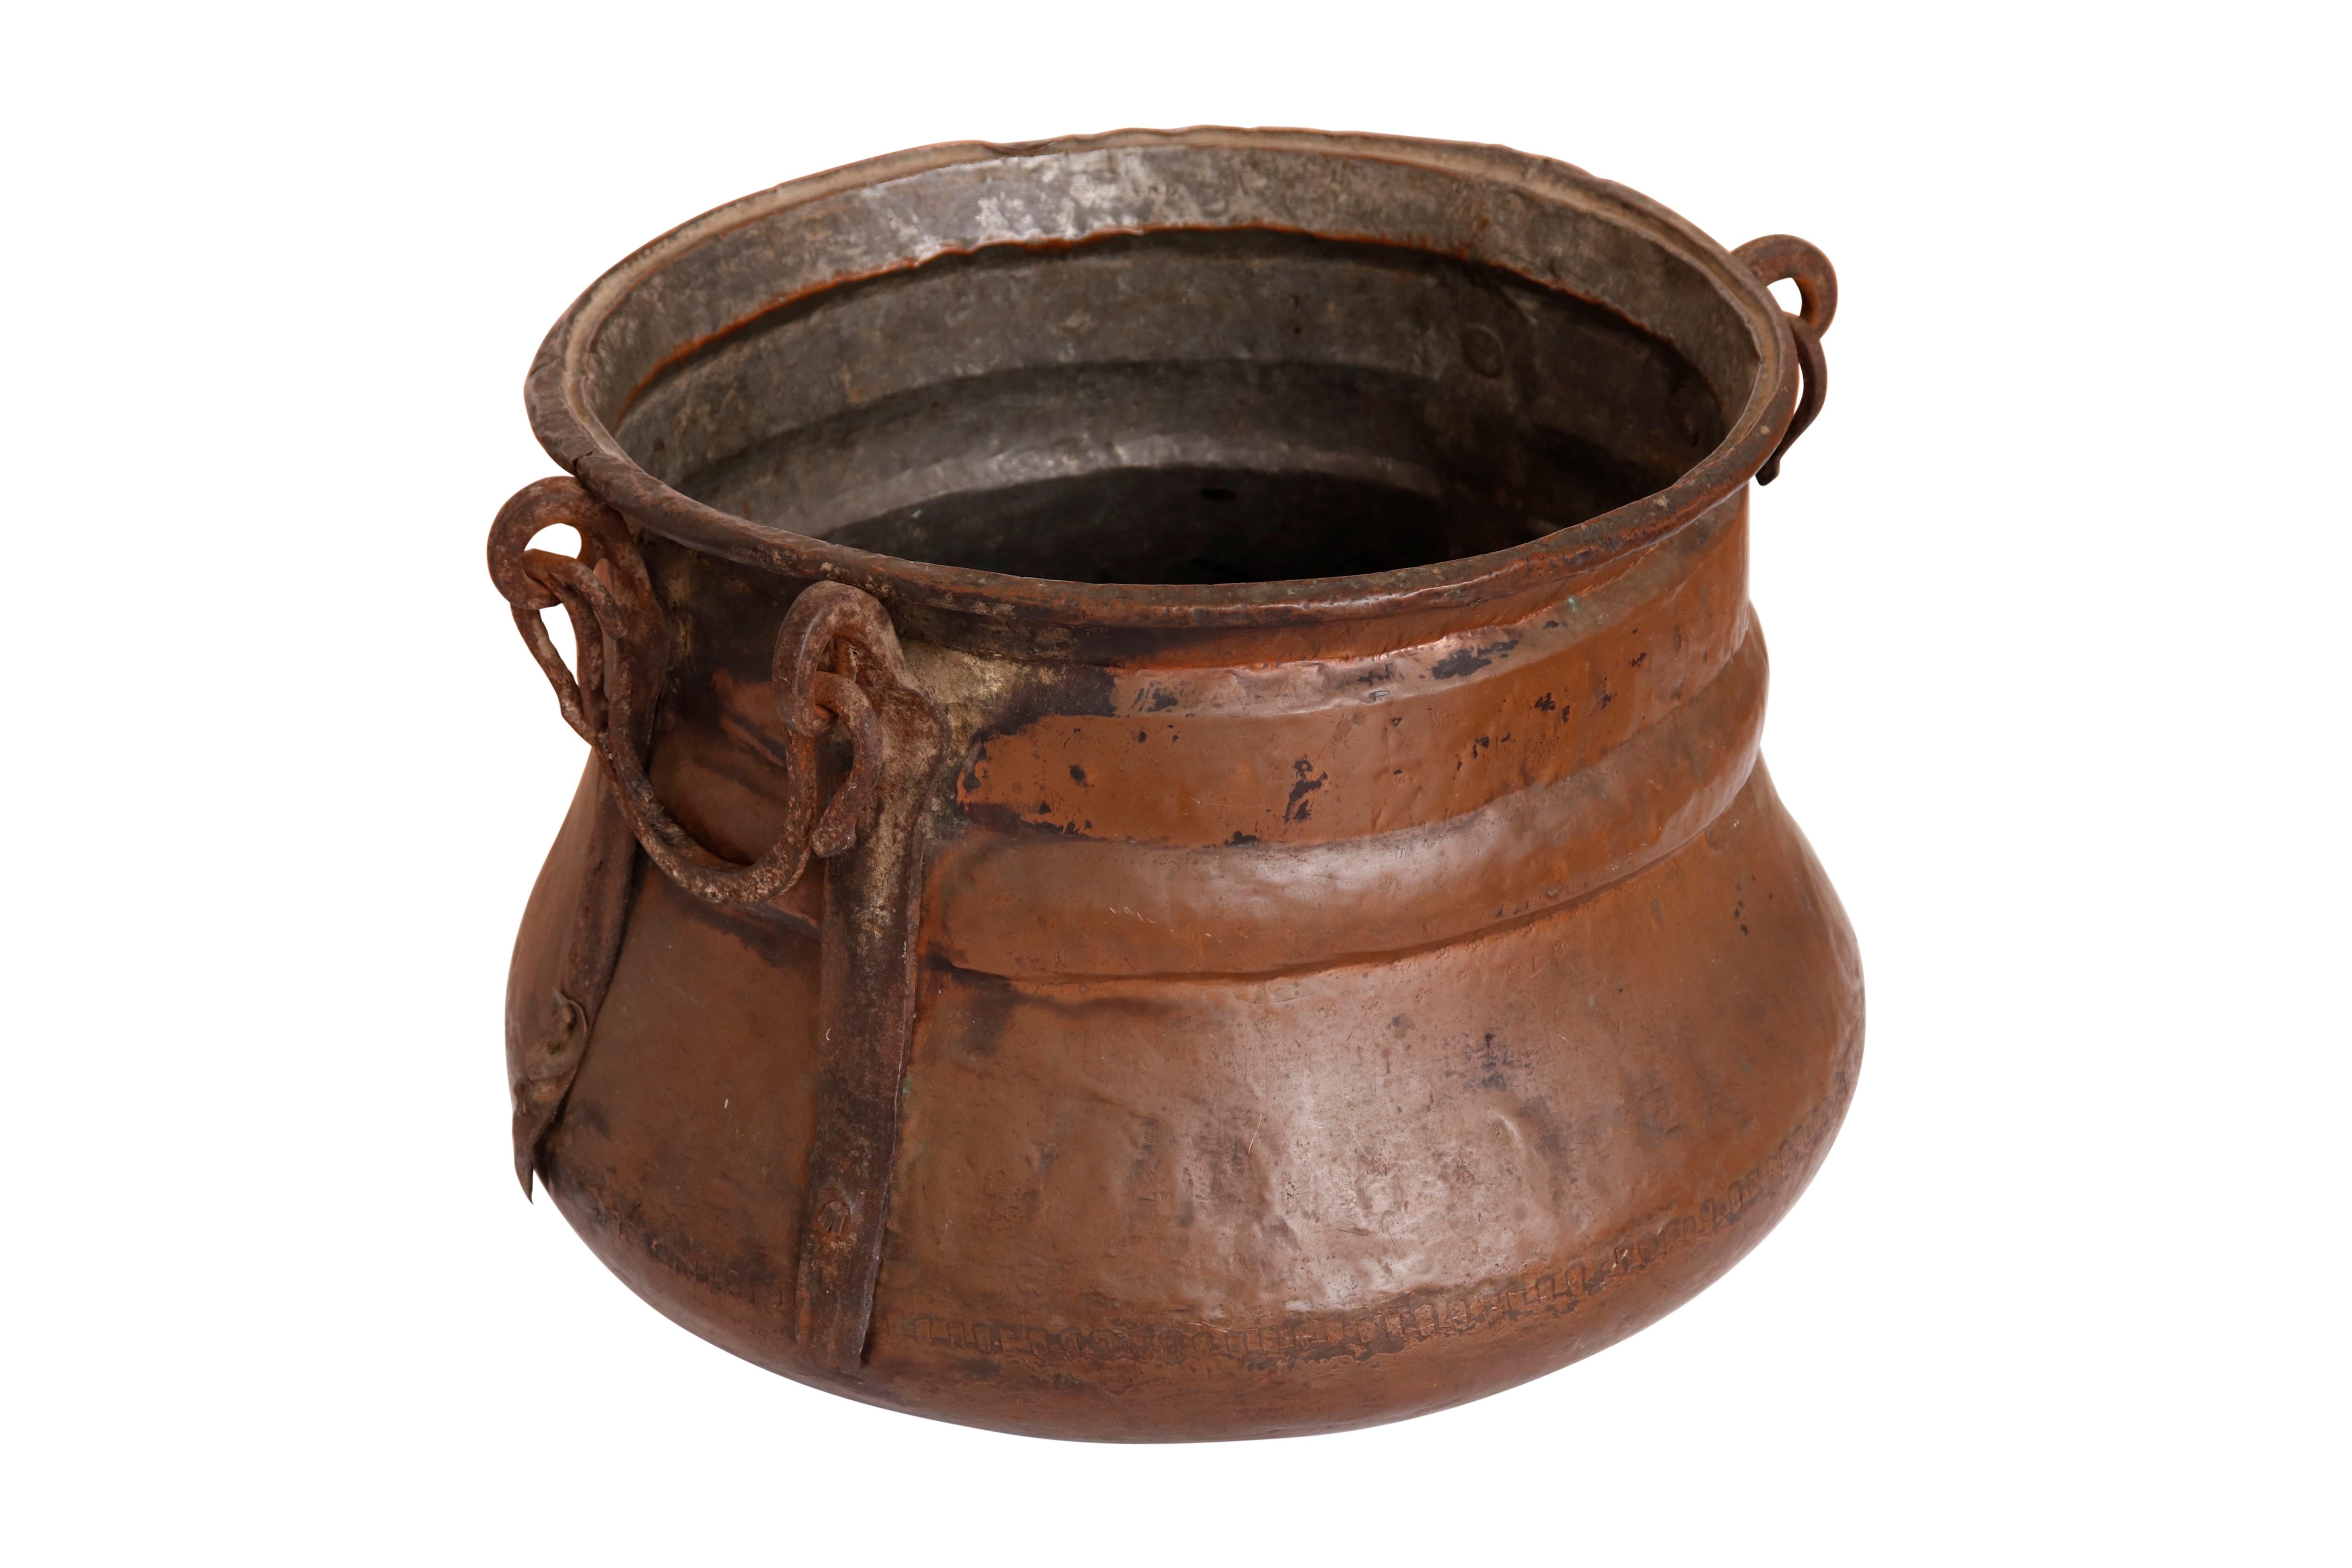 A large, early 20th century hammered copper and tin cauldron with cast iron swan neck handles.
     